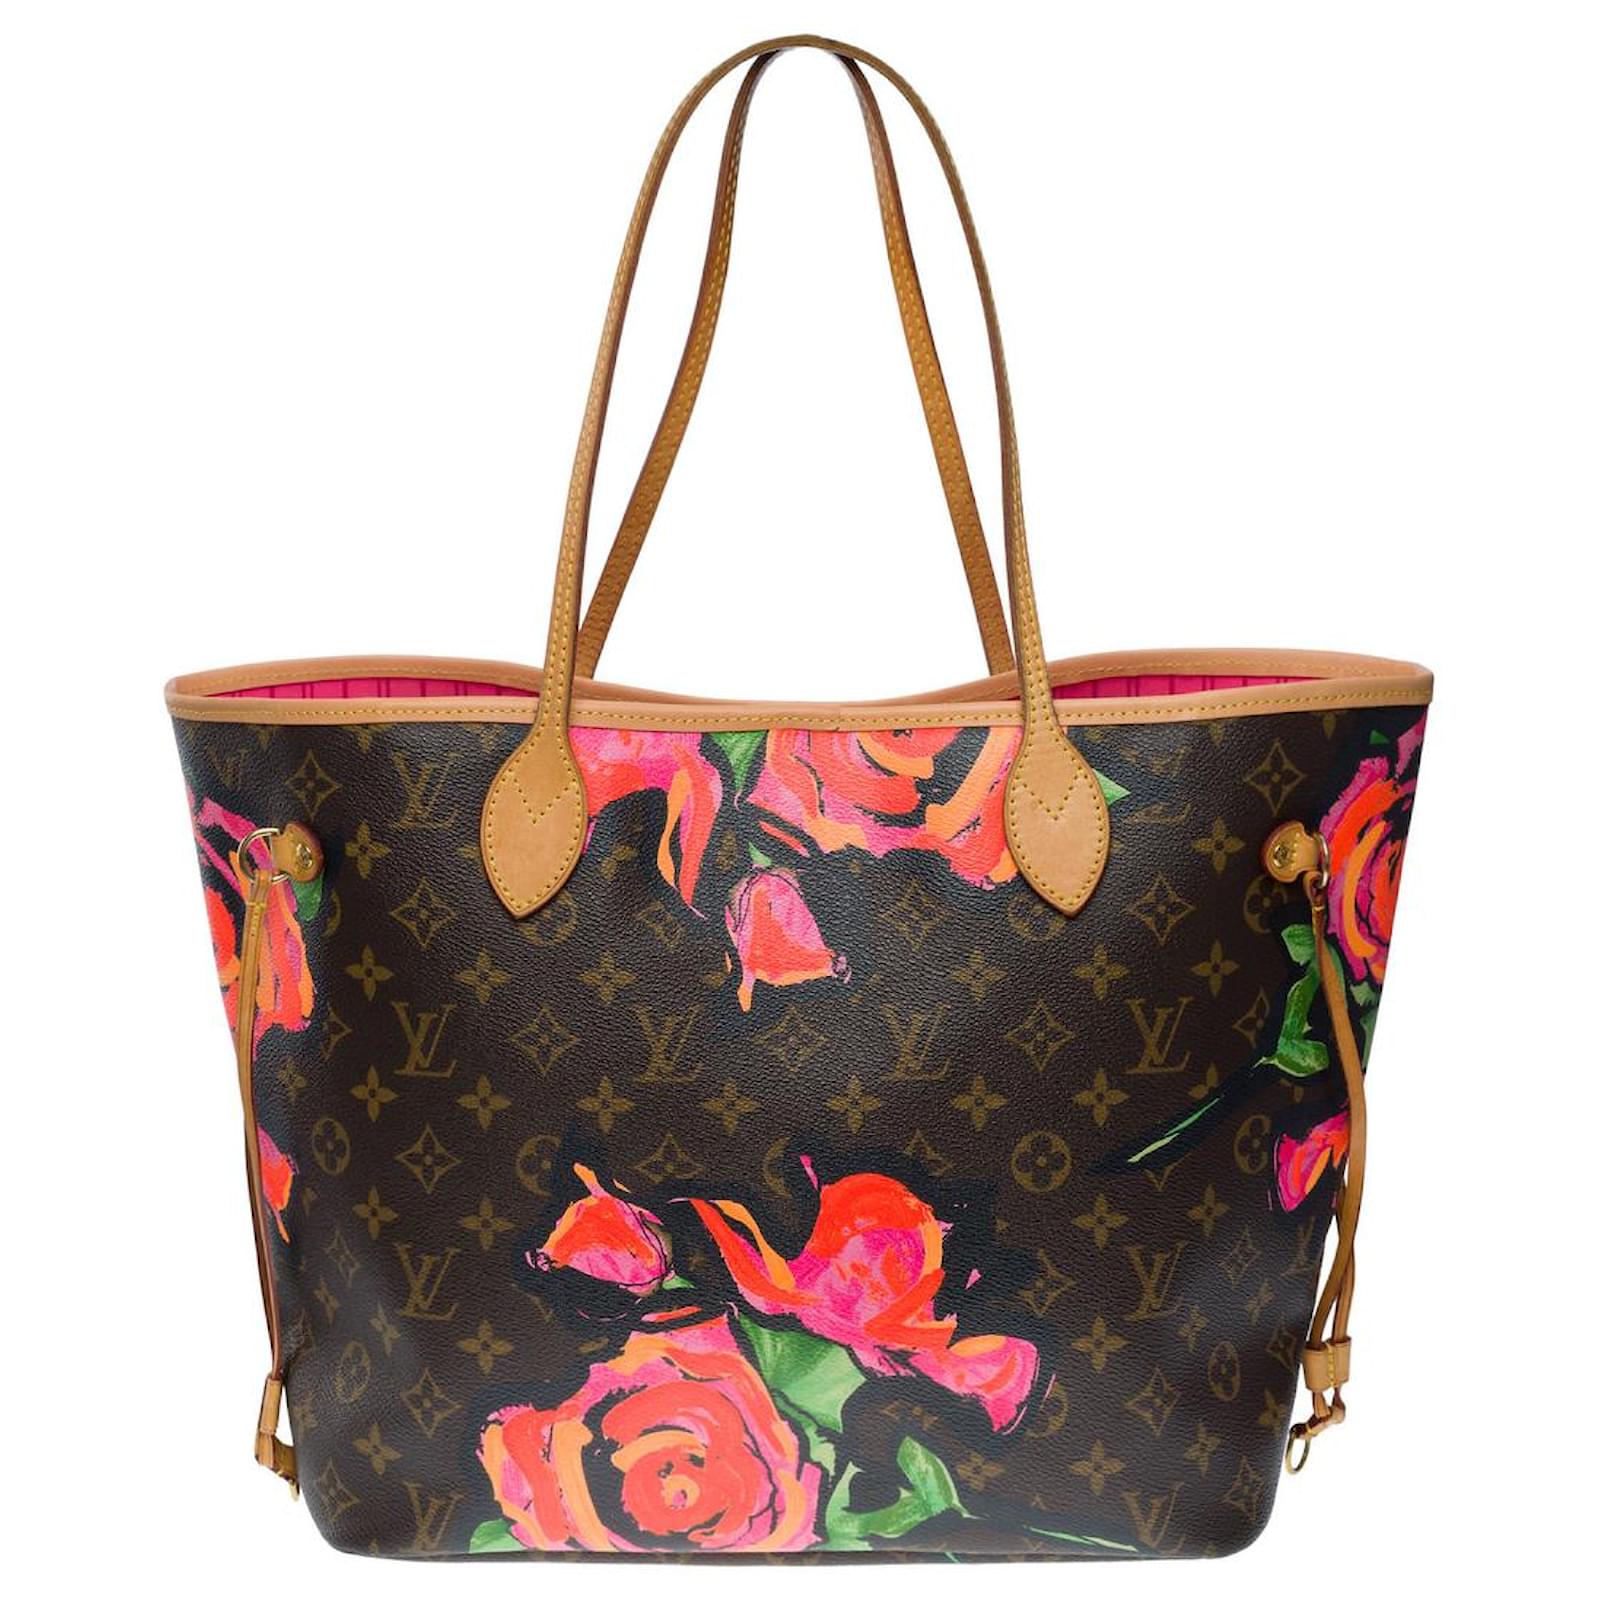 LOUIS VUITTON Neverfull MM Monogram Stephen Sprouse Roses Tote Bag